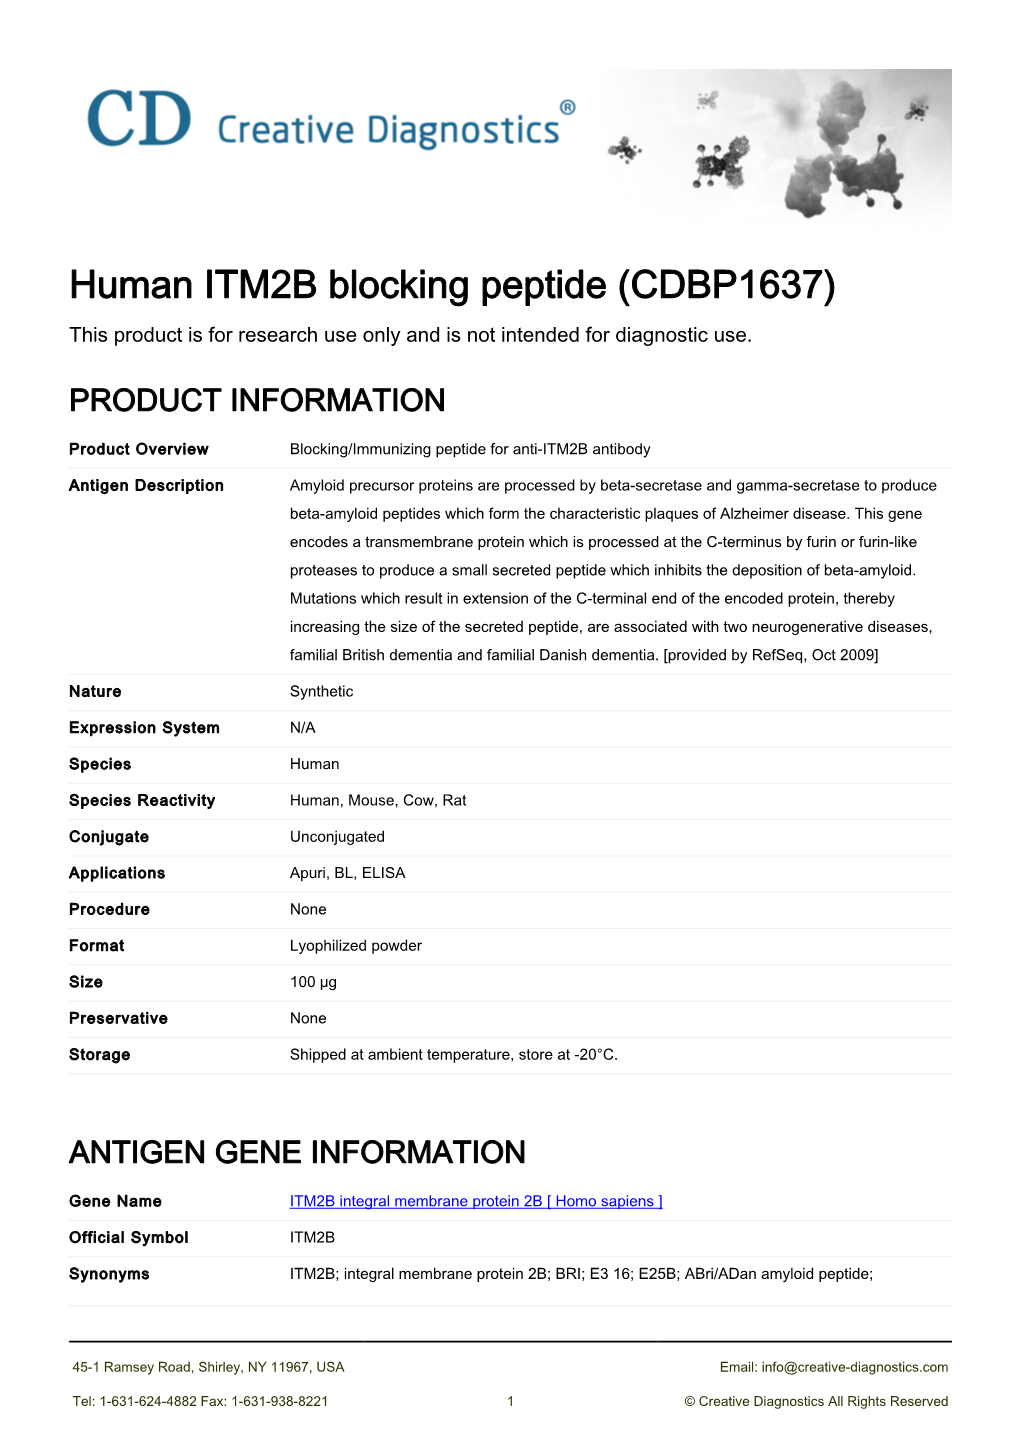 Human ITM2B Blocking Peptide (CDBP1637) This Product Is for Research Use Only and Is Not Intended for Diagnostic Use